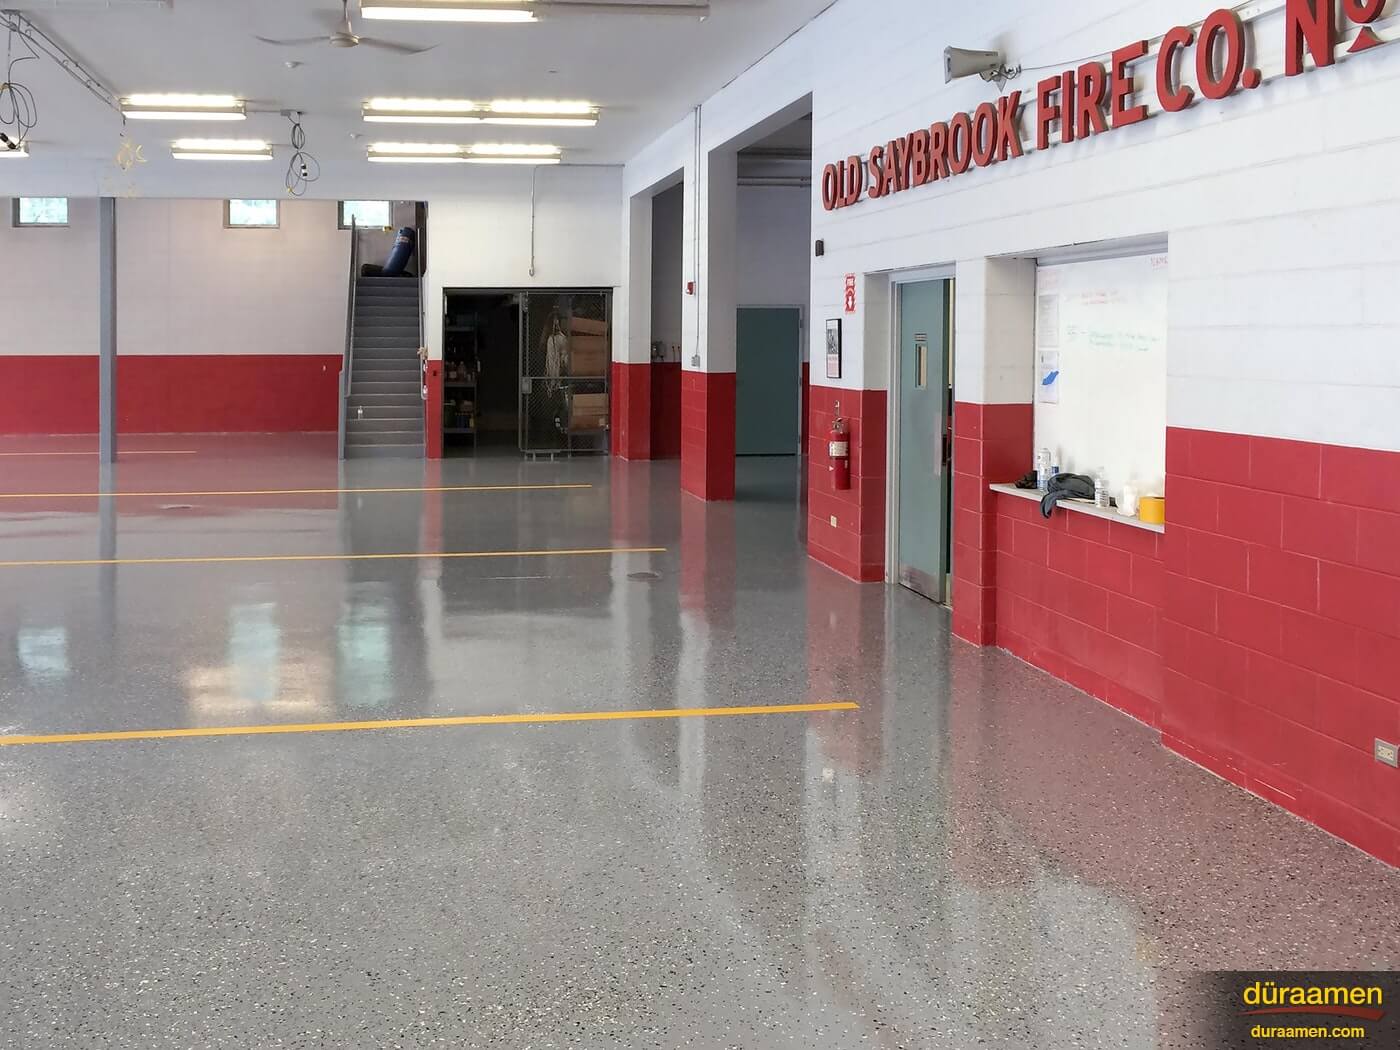 This Firehouse in Saybrook CT had Duraamens Kwortz flooring system installed The installation used a double broadcast of quartz granules Don Pinger of Custom Concrete Solutions recognizes the high quality and durability of Duraamen products which is why he chose Kwortz for the job Firehouse in Old Saybrook CT | Duraamen Engineered Products Inc